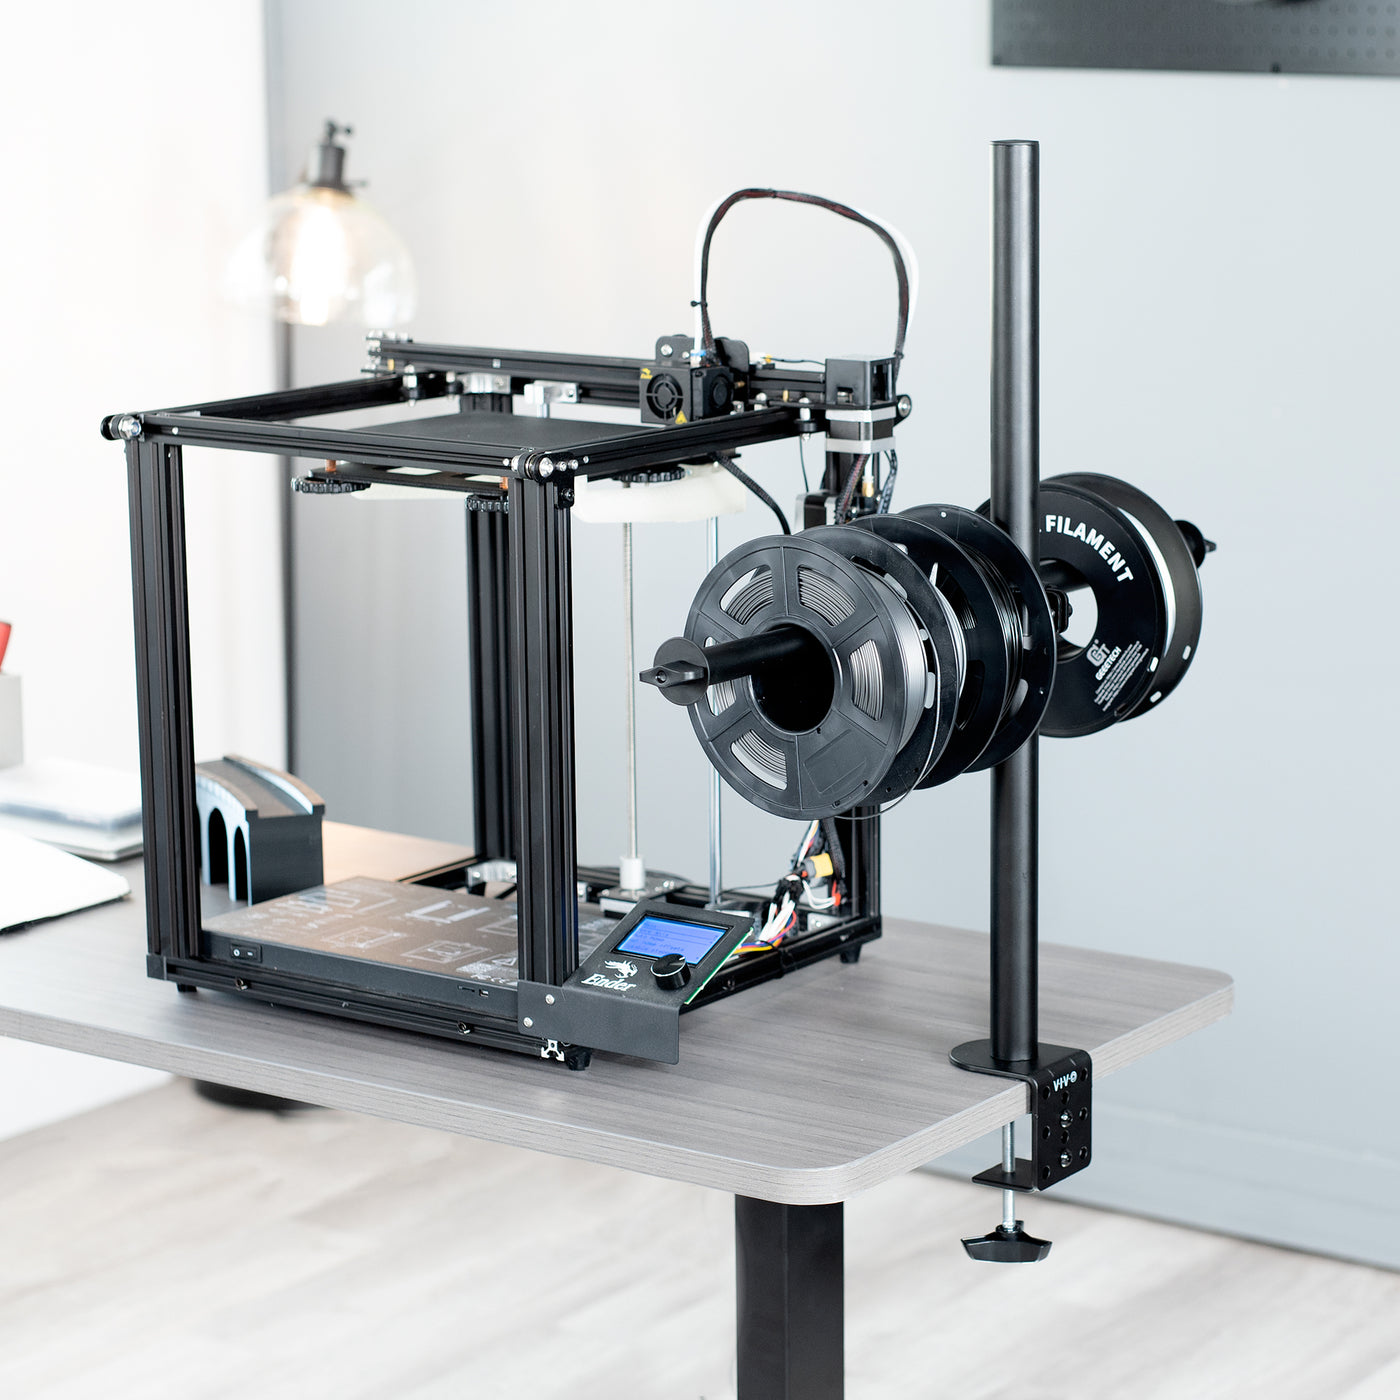 Sturdy clamp-on height adjustable reel holder for 3D printer.